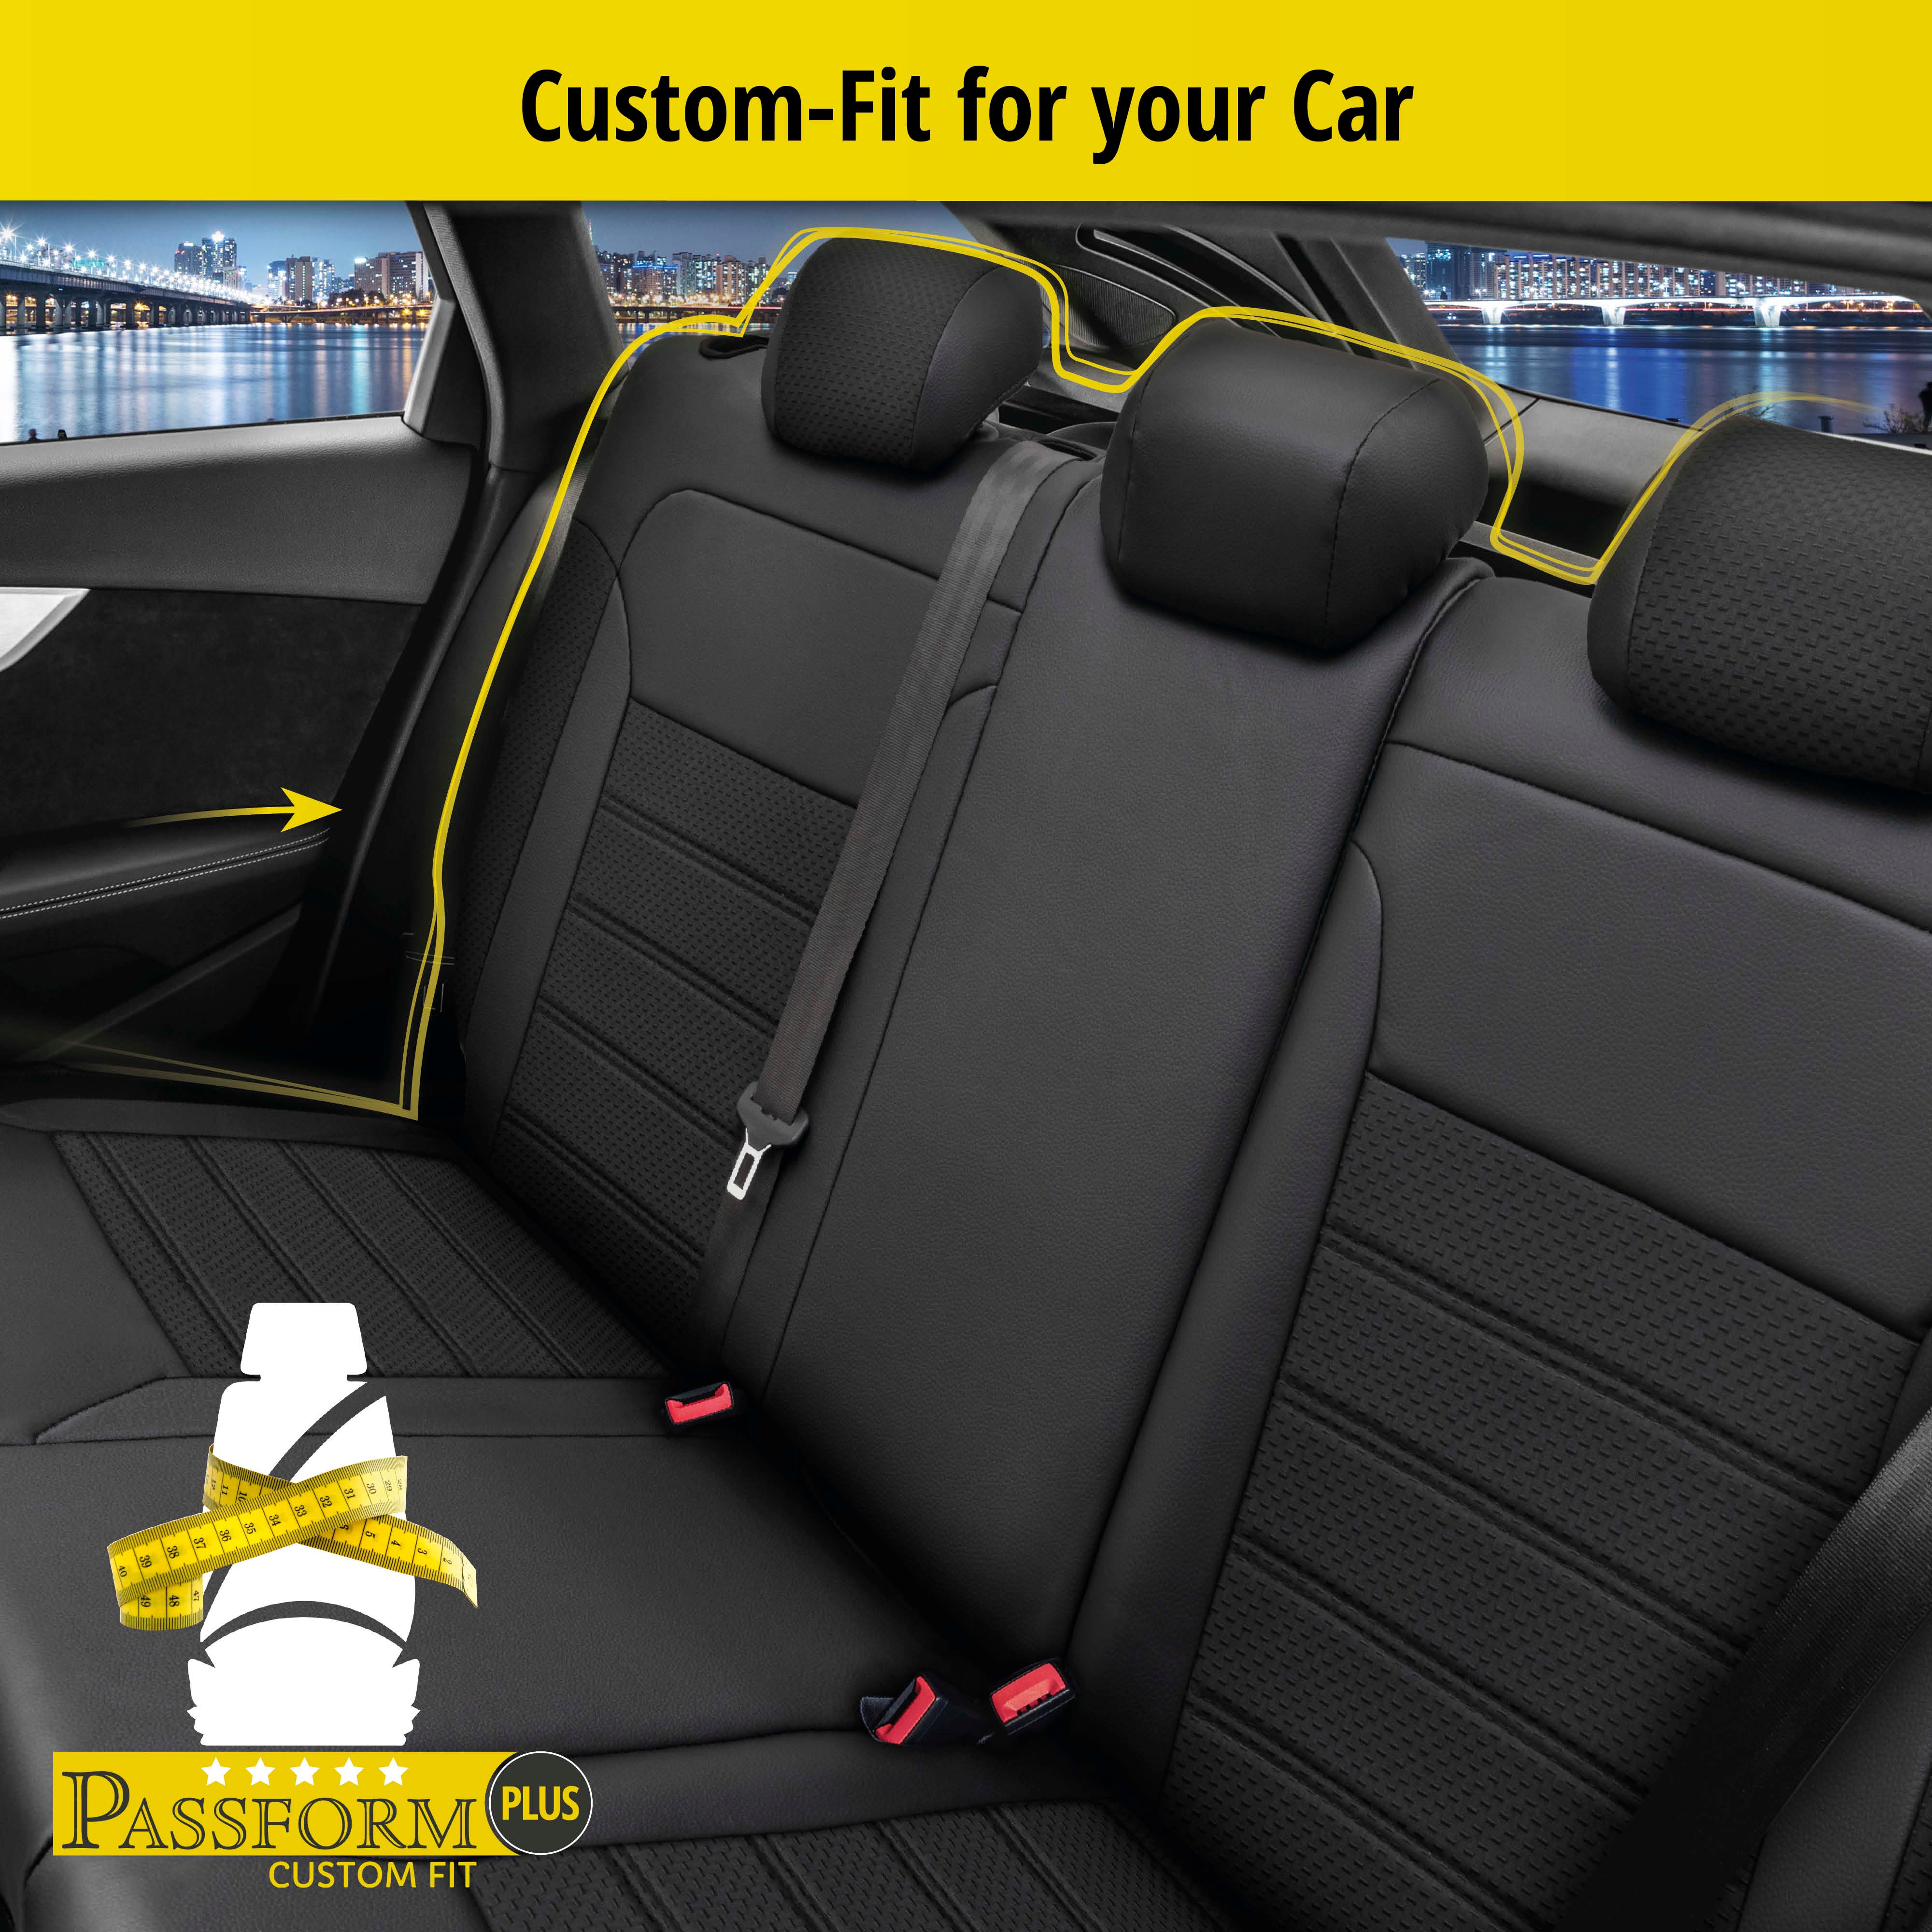 Custom-Fit car seat cover 'Expedit' for VW Passat Highline from 2015 to present - 1 back seat cover for standard seats